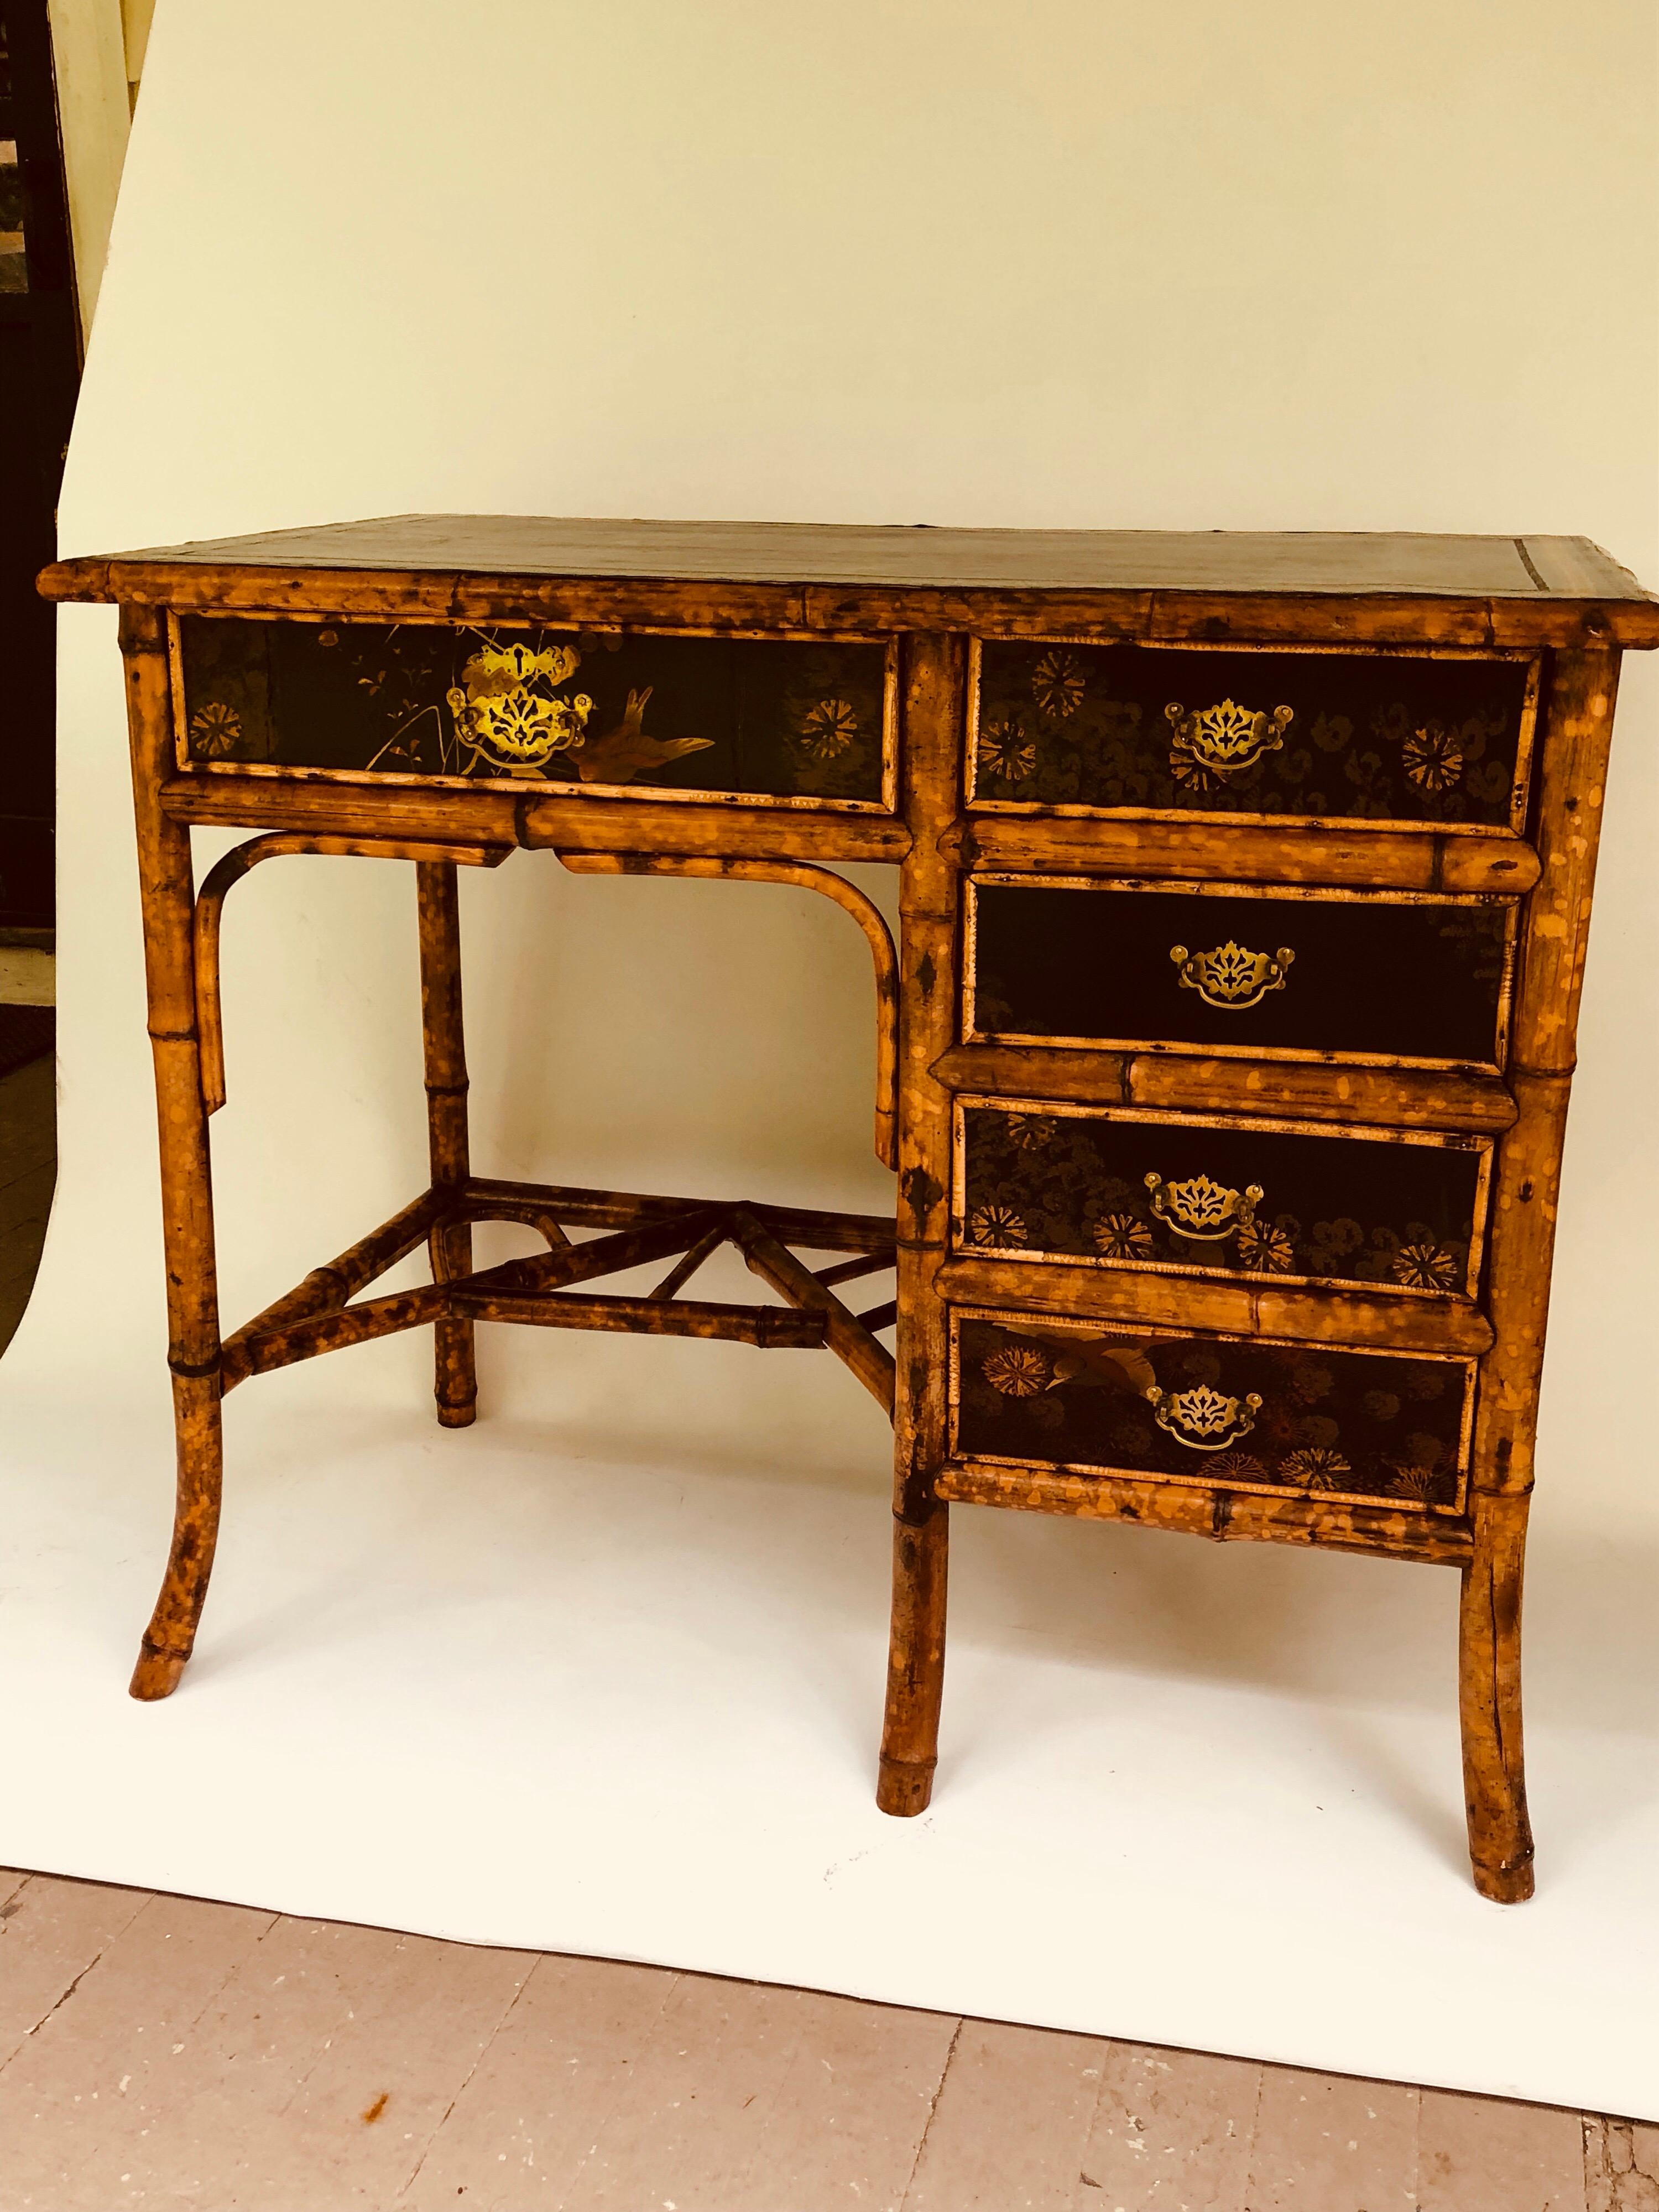 Decorative Victorian bamboo, lacquer and brass-mounted desk, with five (5) drawers. Inset leather top and lincrusta (Victorian wallpaper) applied paper on the right hand side. Probably a crack on that side, hidden by wallpaper application.